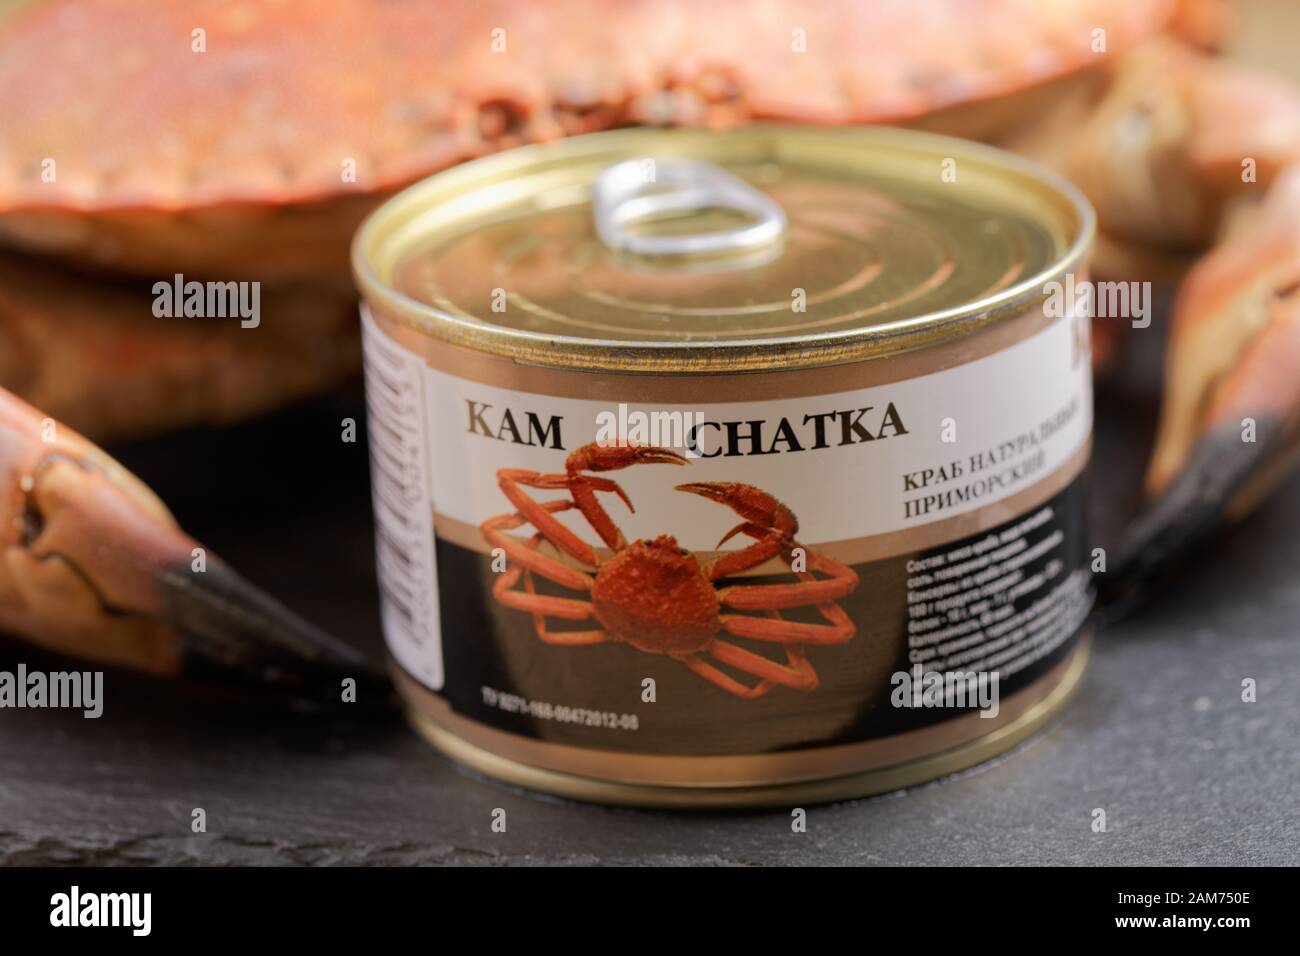 Chatka: The Authentic Russian King Crab